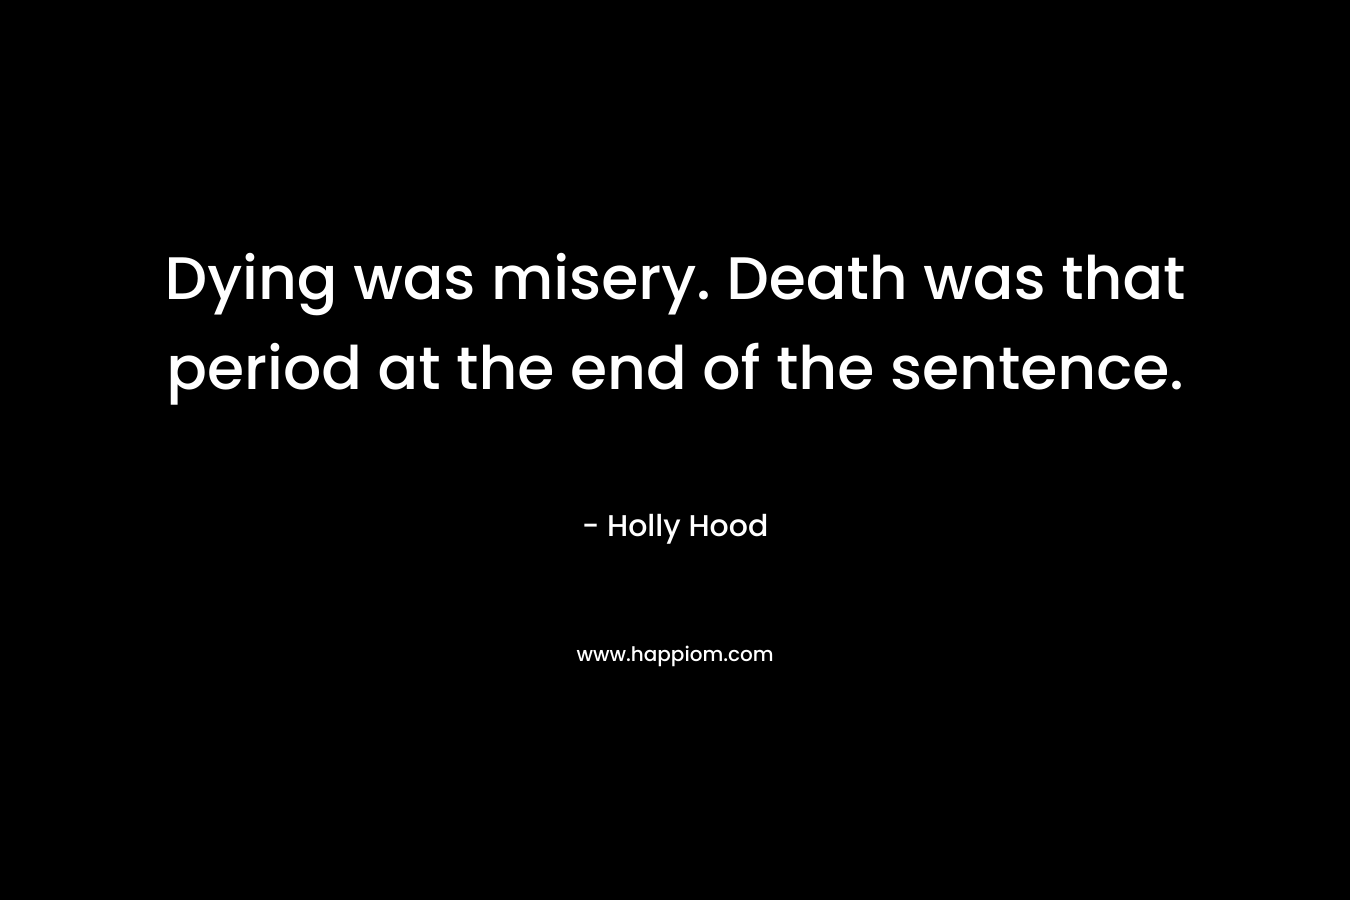 Dying was misery. Death was that period at the end of the sentence.